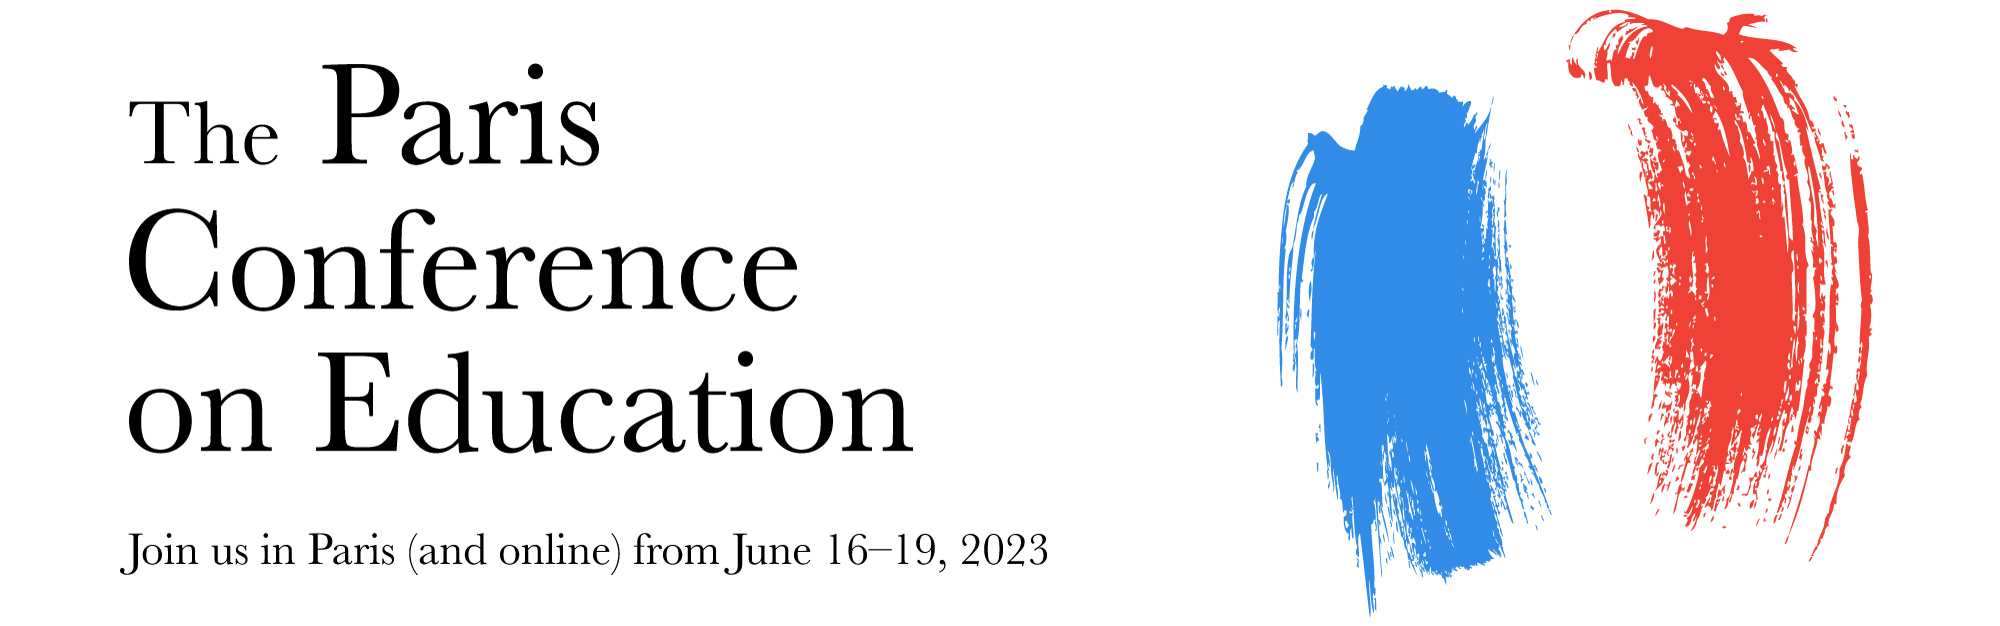 The 2nd Paris Conference on Education (PCE2023) Logo